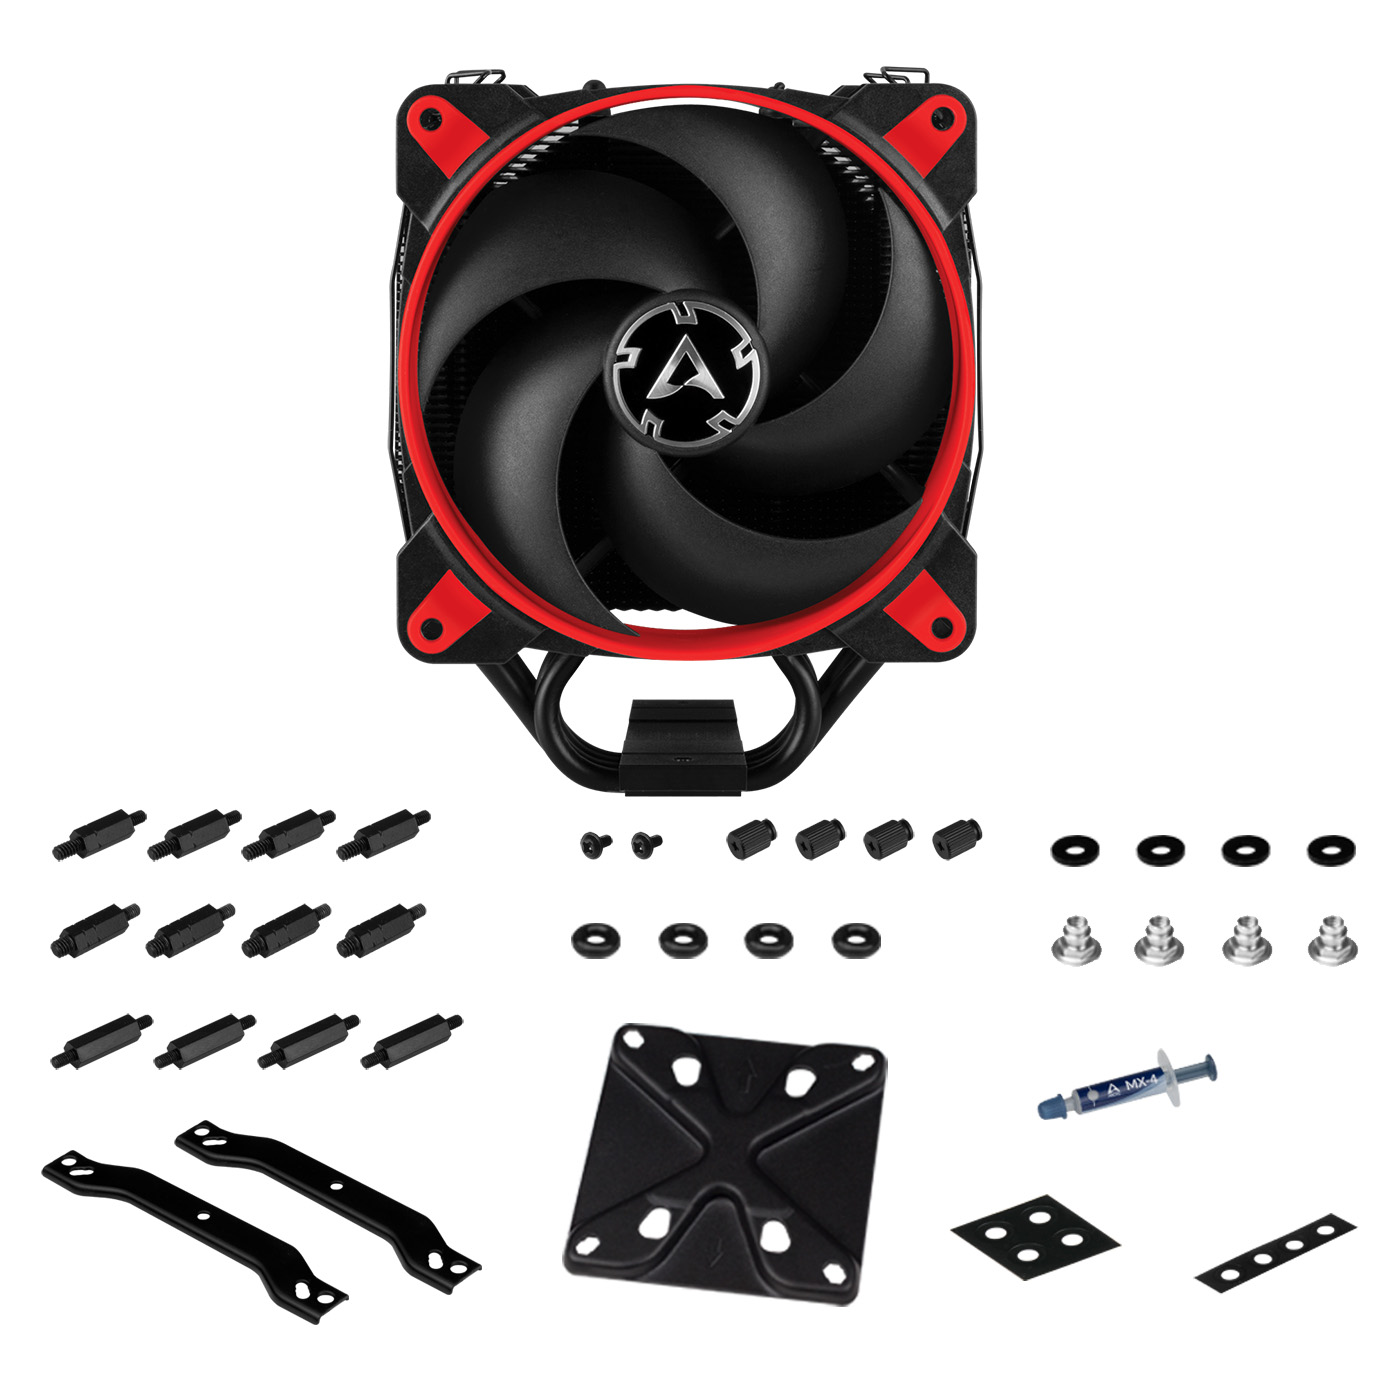 Tower CPU Cooler with Push-Pull Configuration ARCTIC Freezer 34 eSports DUO (Red) Package Contents